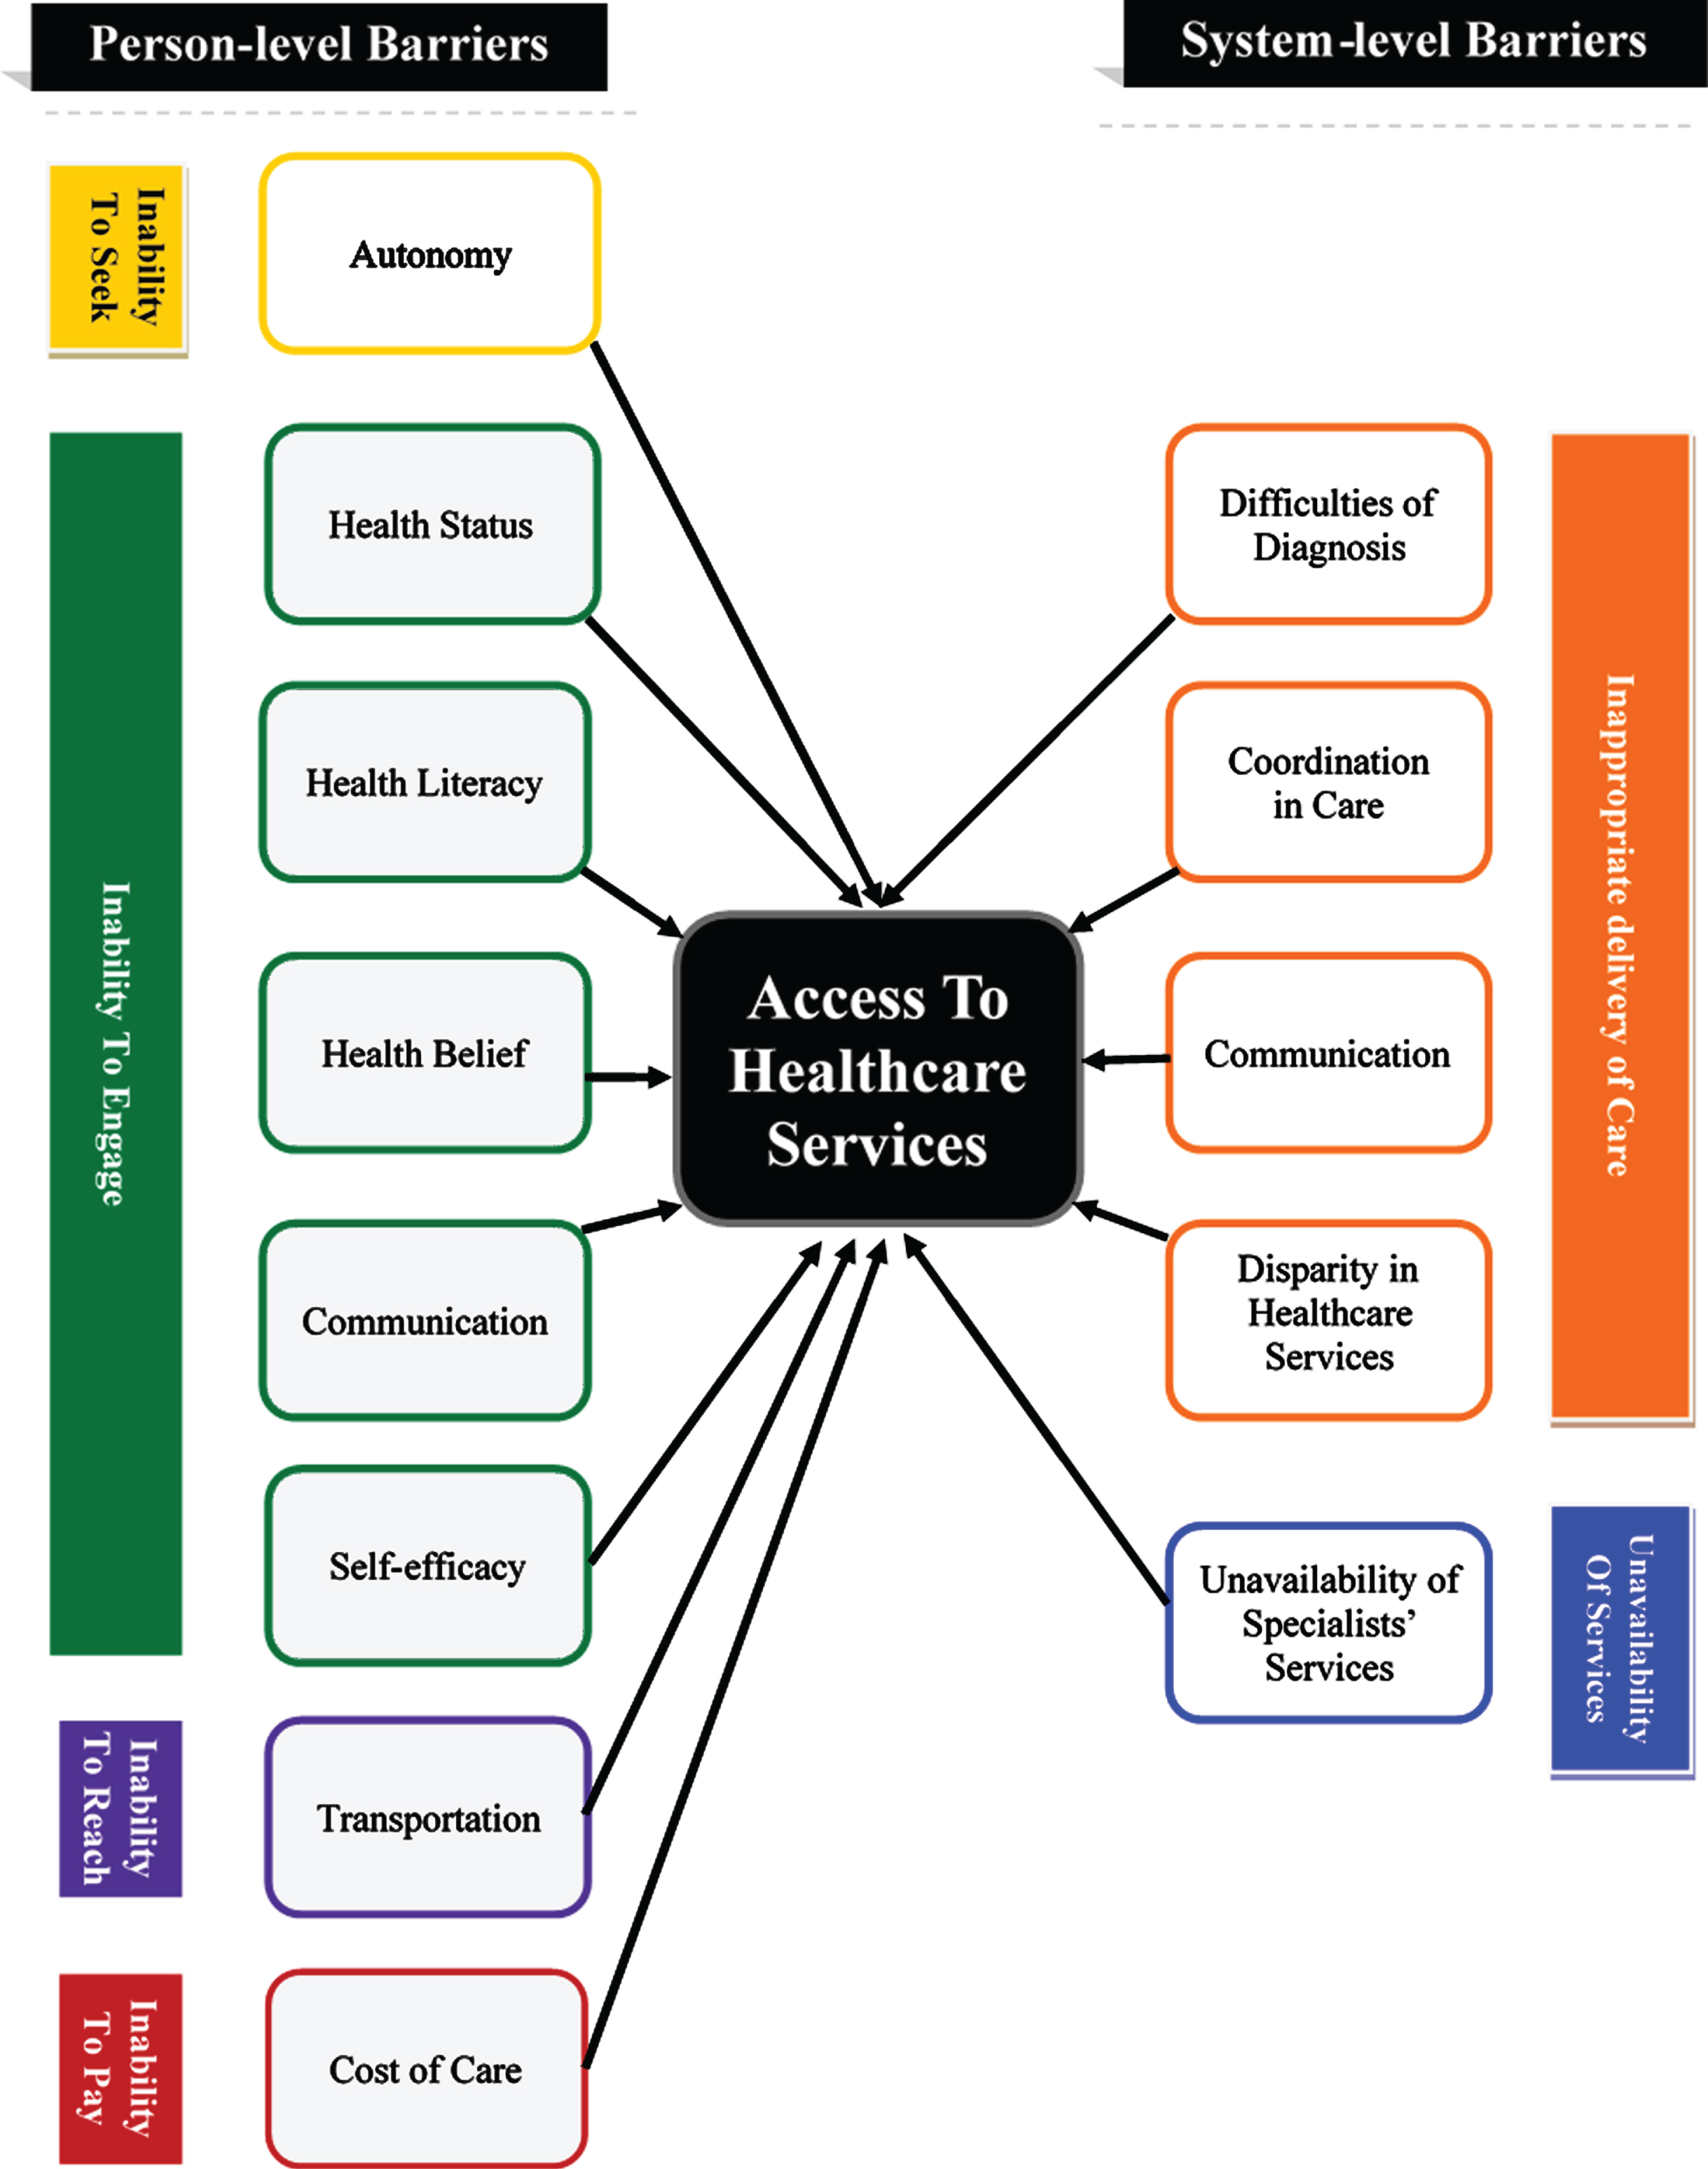 Barriers to access healthcare services for people with Parkinson’s disease.